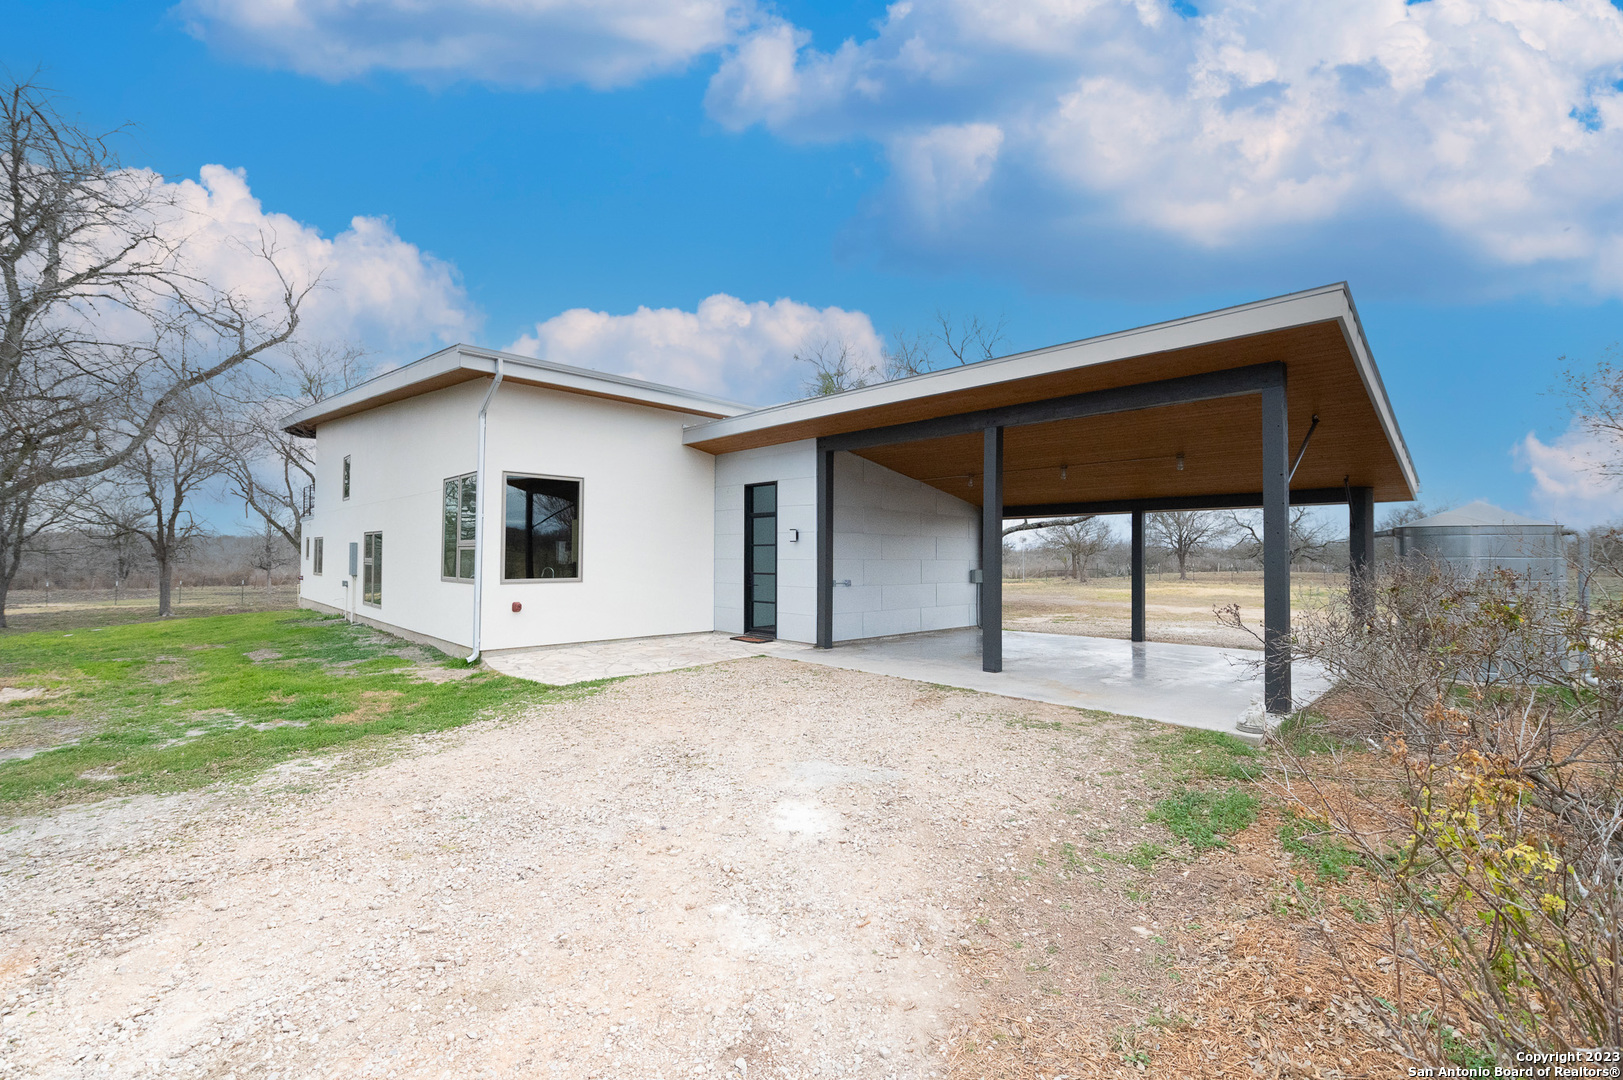 One of a kind modern home on 14 acres in MVISD. COMPLETELY REMODELED/REBUILT over the last 2 years. This 1977 sqft, 2 bed/3 bath home features an open concept living with soaring high ceilings and a loft that could be converted to 3rd bedroom if you wanted. Off the master suite is an outdoor shower, to keep the mess outside after a long day of work on the ranch! After that hard days work, enjoy the peaceful country living (minus the bugs)  on the screened in back porch. Additionally, property is fully fenced and ag-exempt with a barn and tank that owner has never seen dry! Location of this property is phenomenal, being just minutes from Castroville off of FM 1343, but with access via private lane as not to be right on the busy road. A MUST SEE!